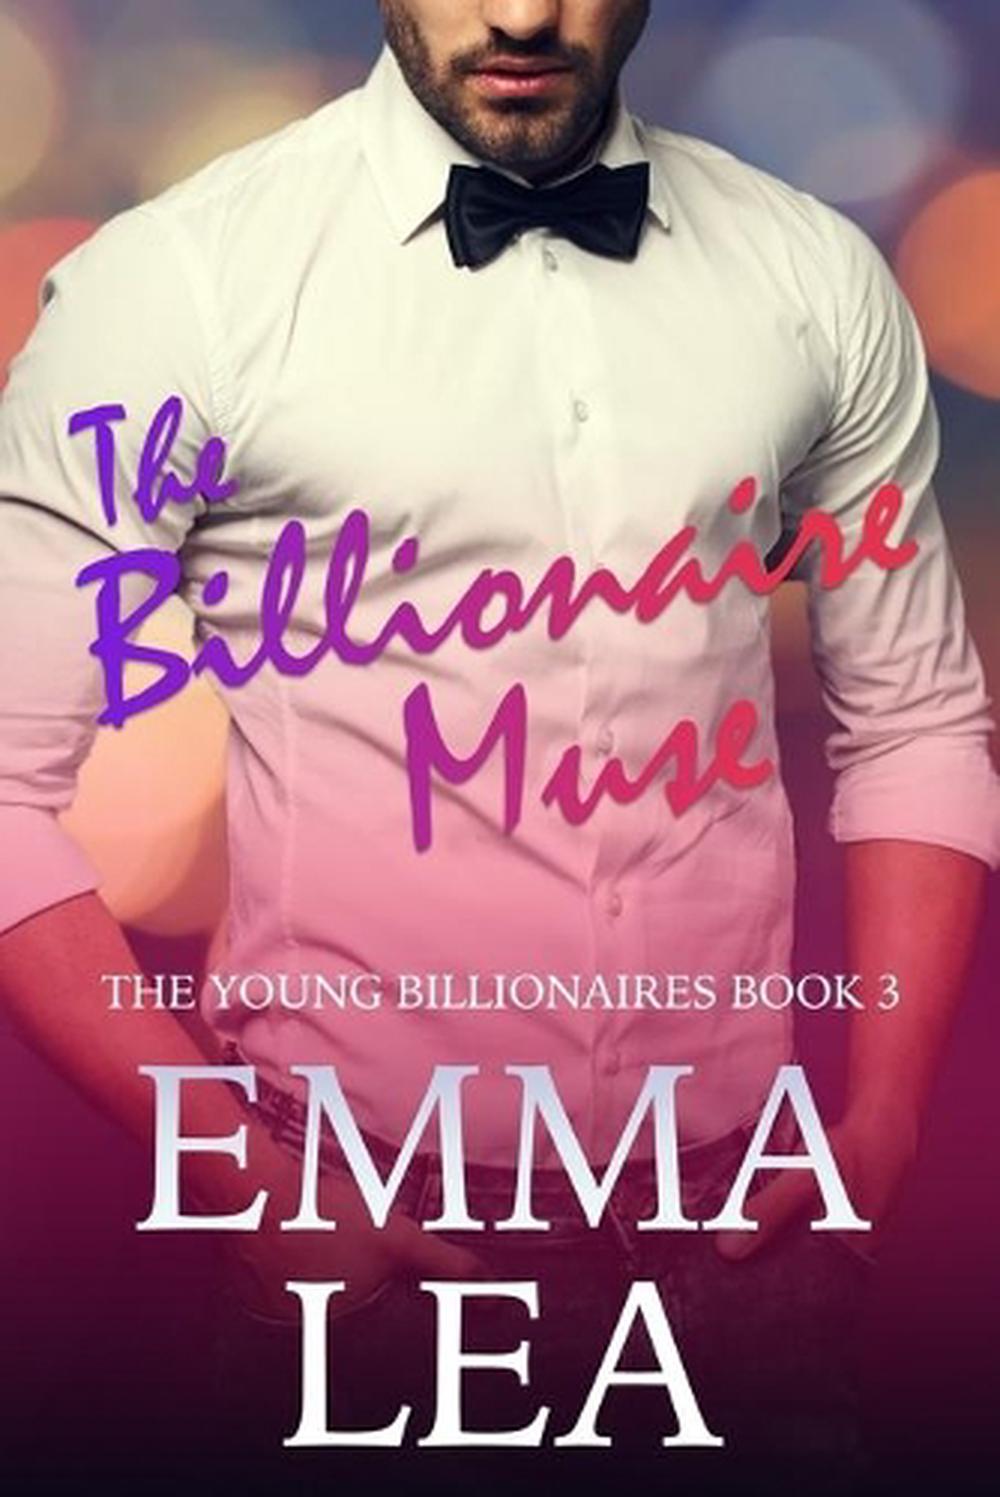 Stalked by the Billionaire by Emma Bray